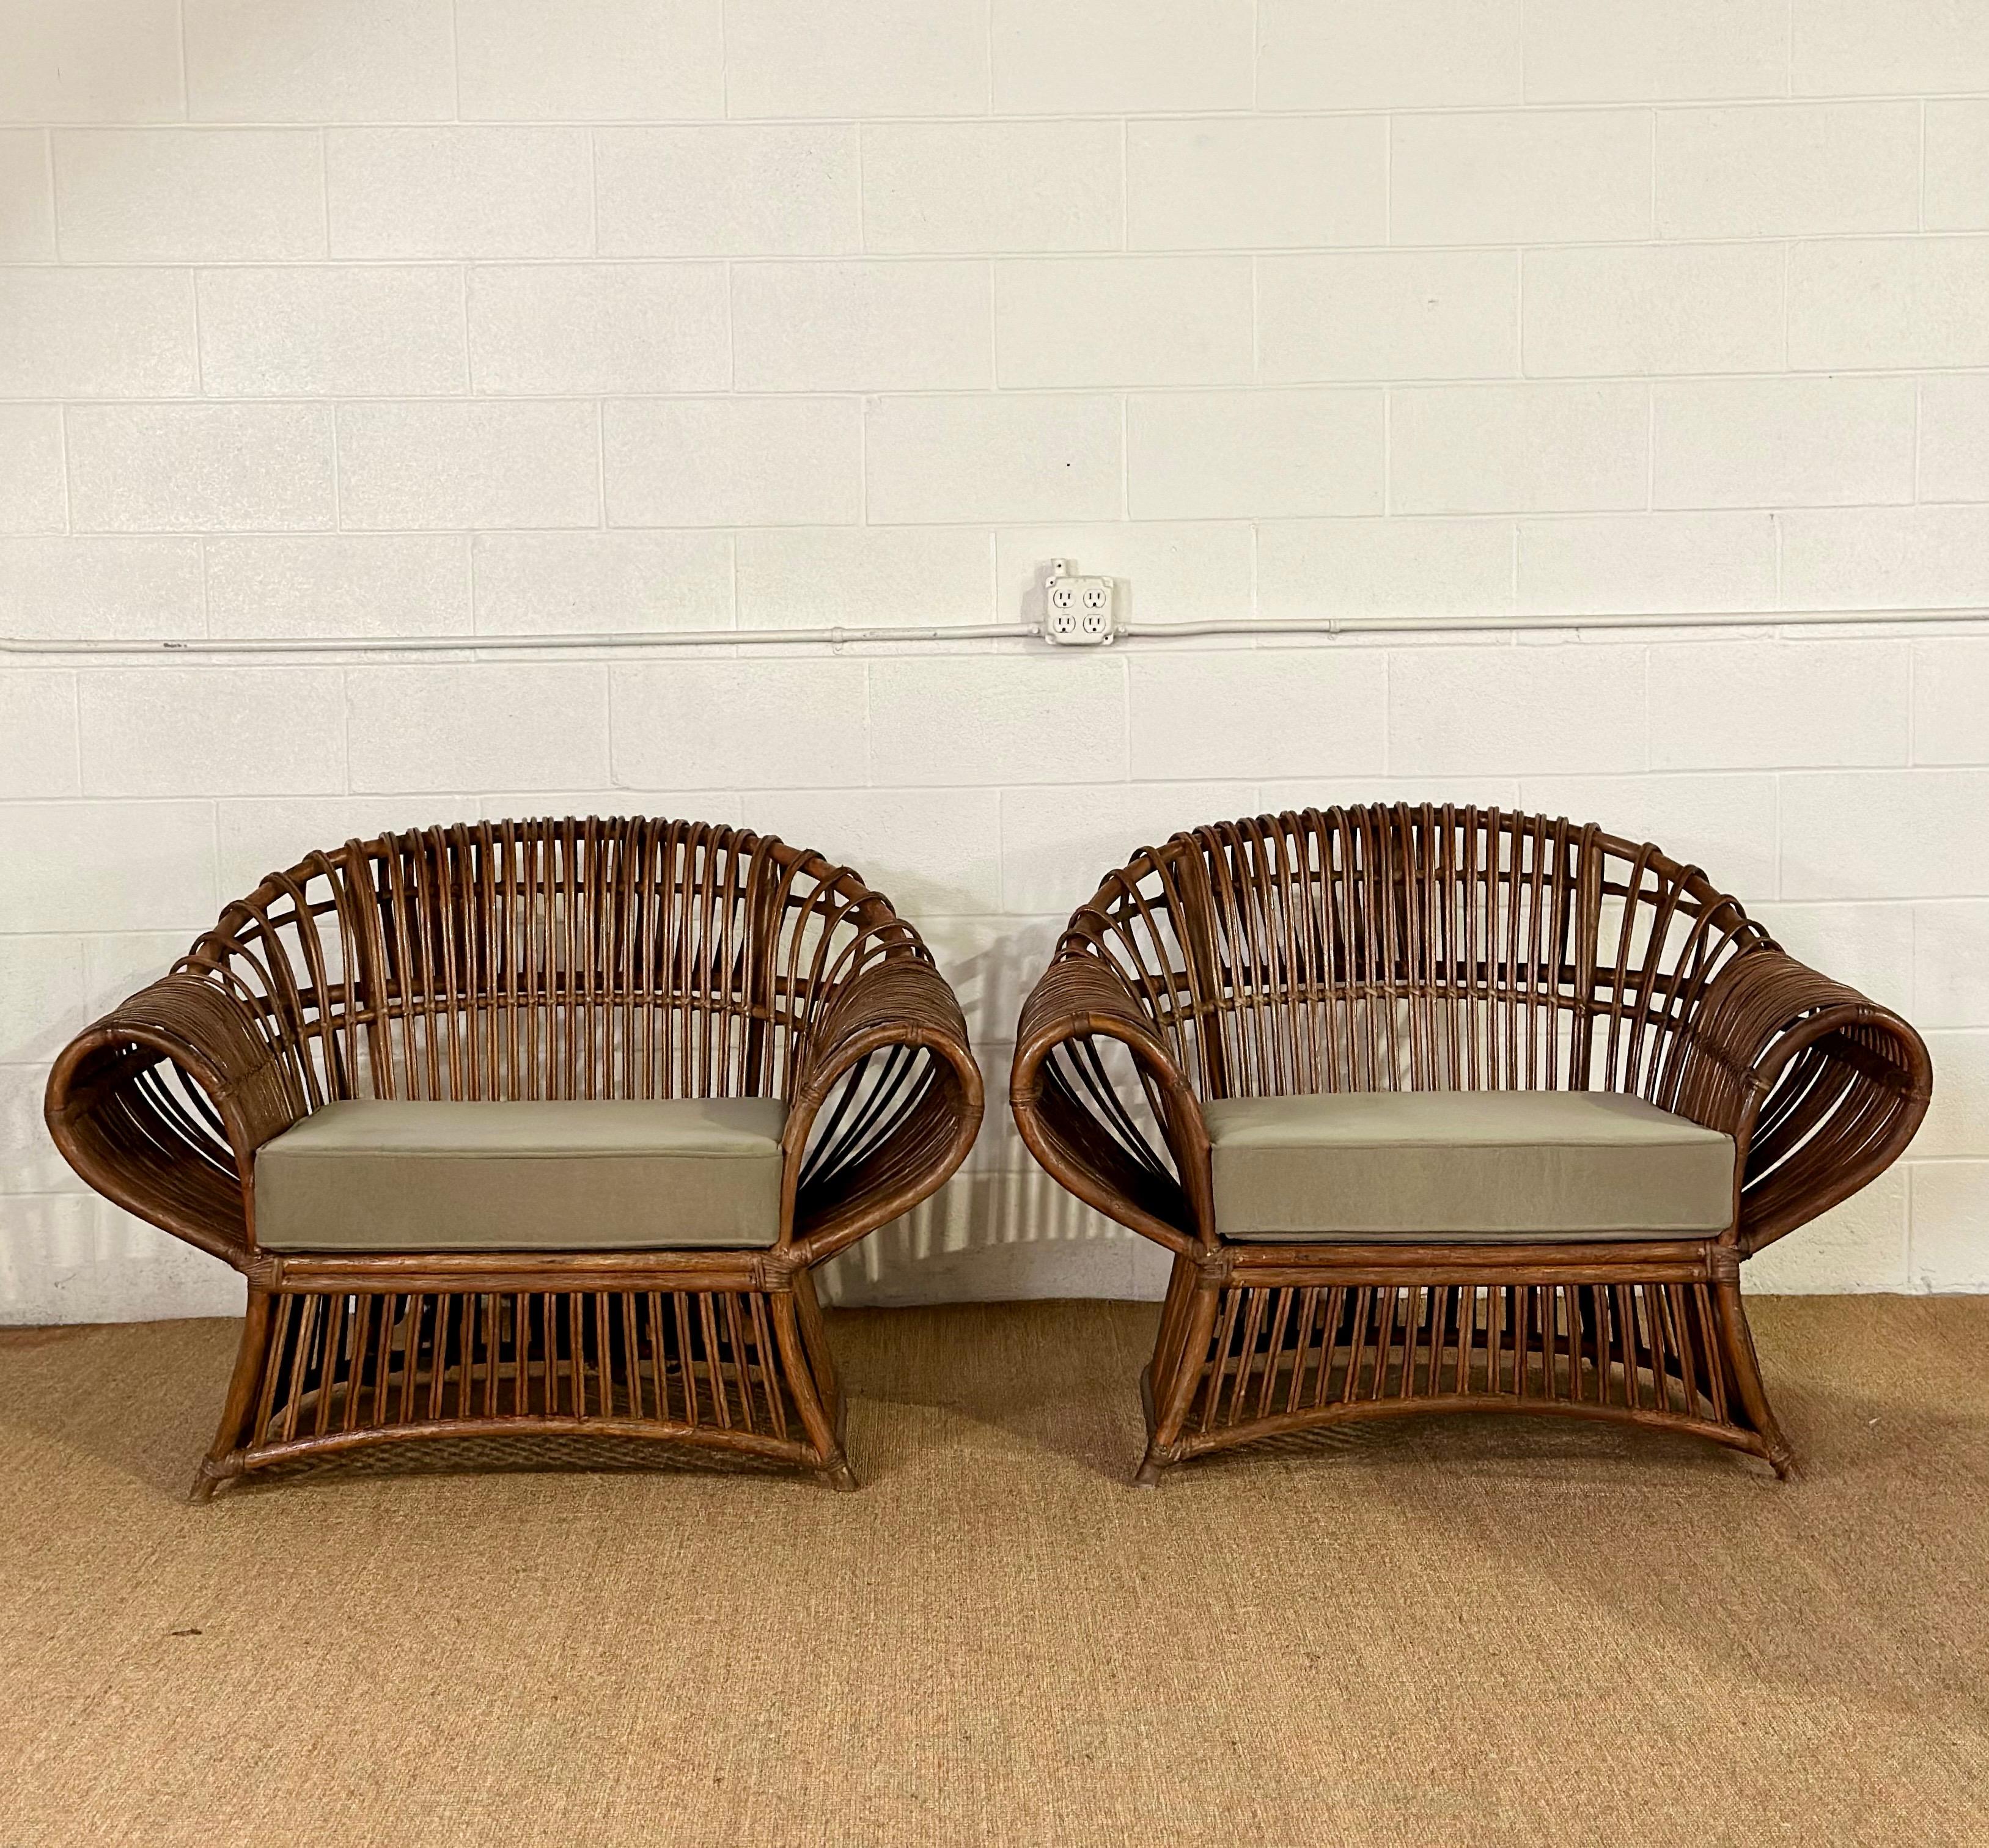 We are very pleased to offer a unique pair of beautiful lounge chairs, circa the 1970s.  Crafted with solid rattan, this pair exudes a timeless organic aesthetic, showcasing meticulous handwoven construction that speaks to artisanal craftsmanship. 